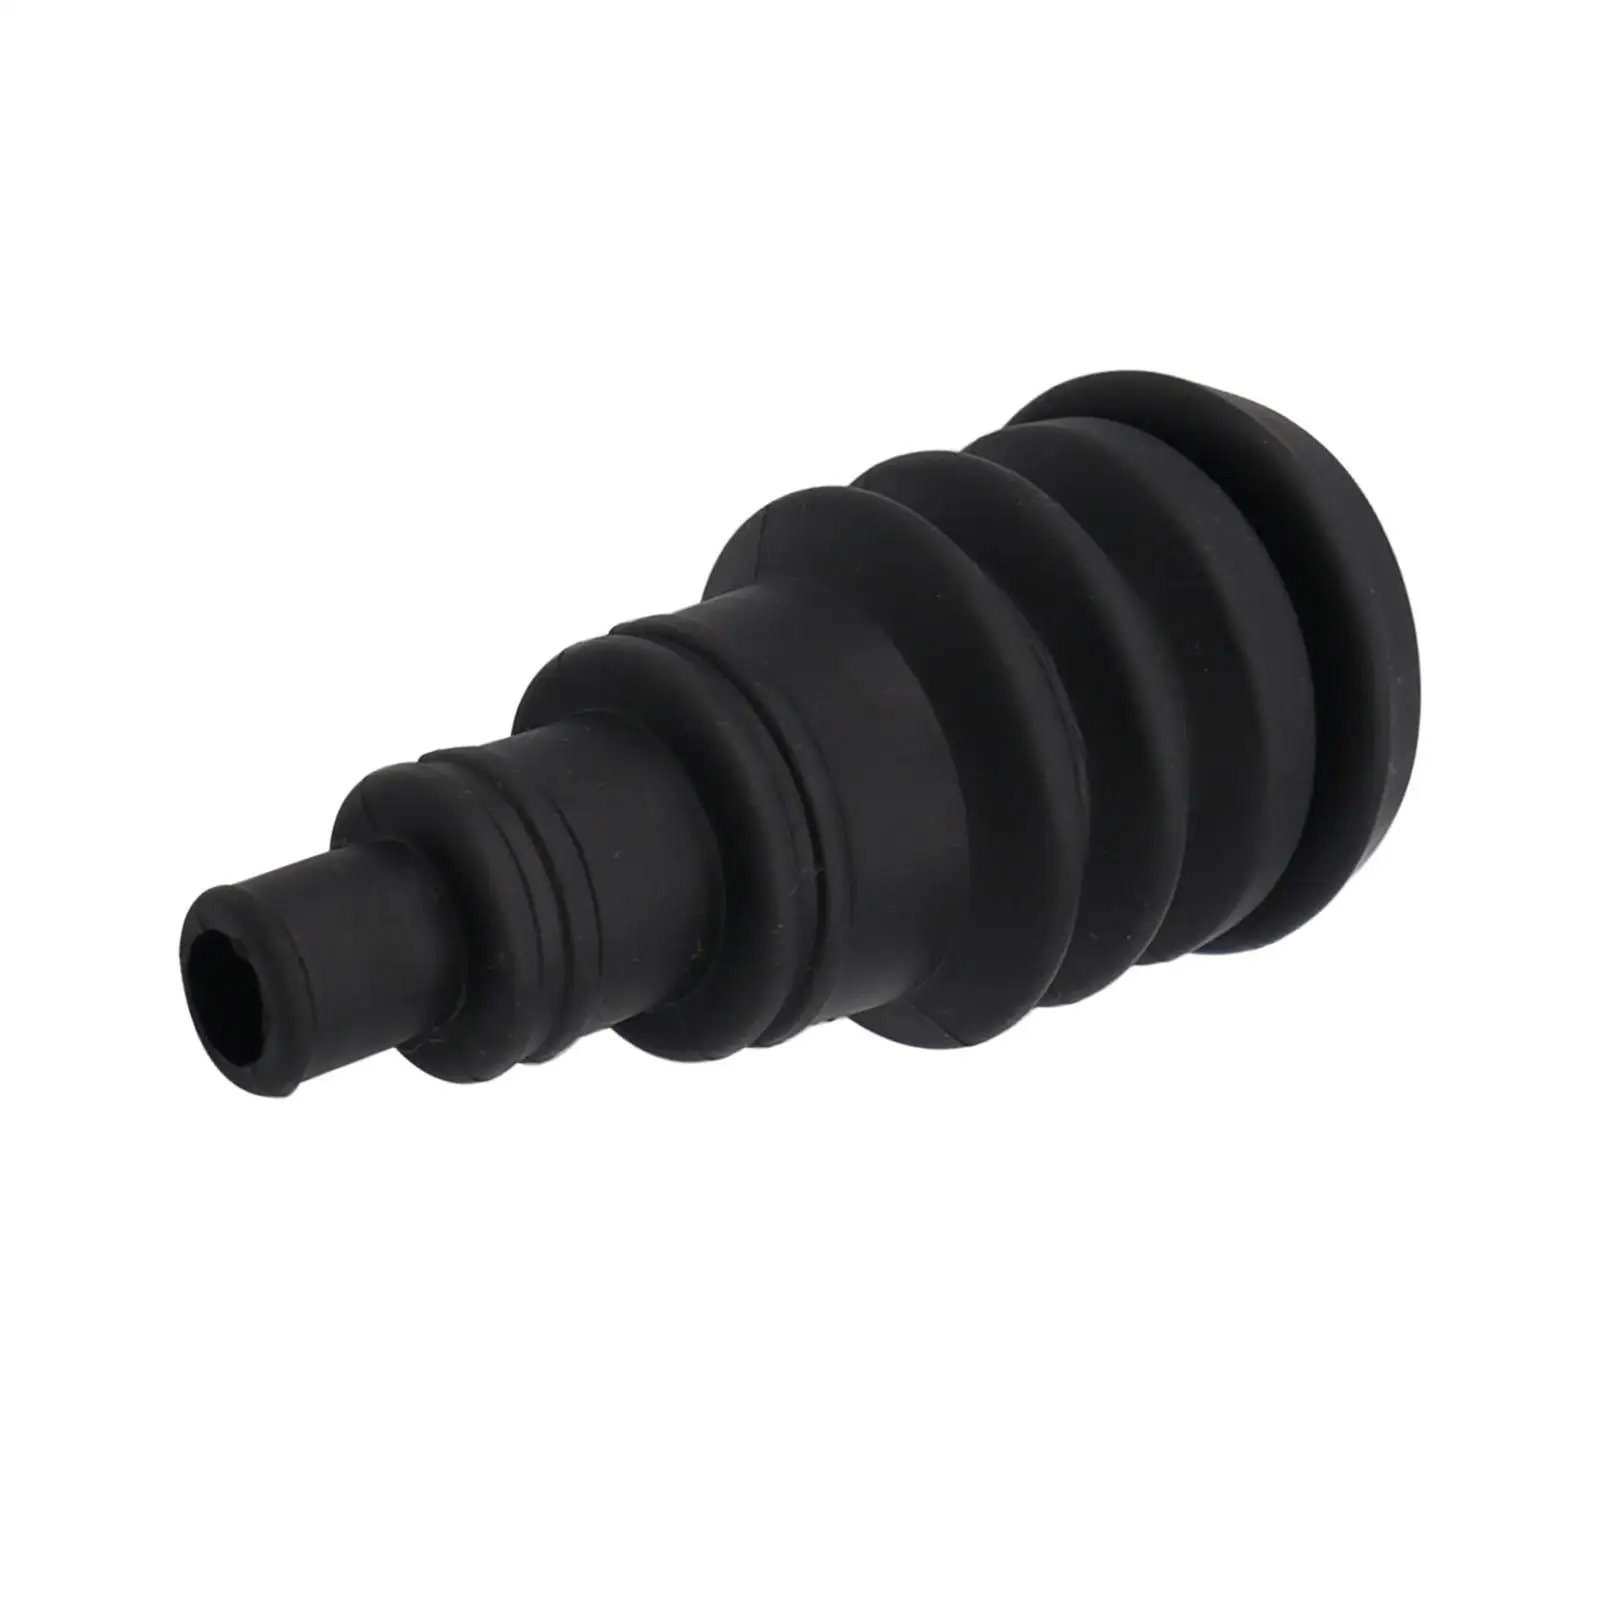 Universal Firewall Boot Rubber for Running Cable Through Firewalls & Bulkheads Safely Compatible with Any Vehicle Black